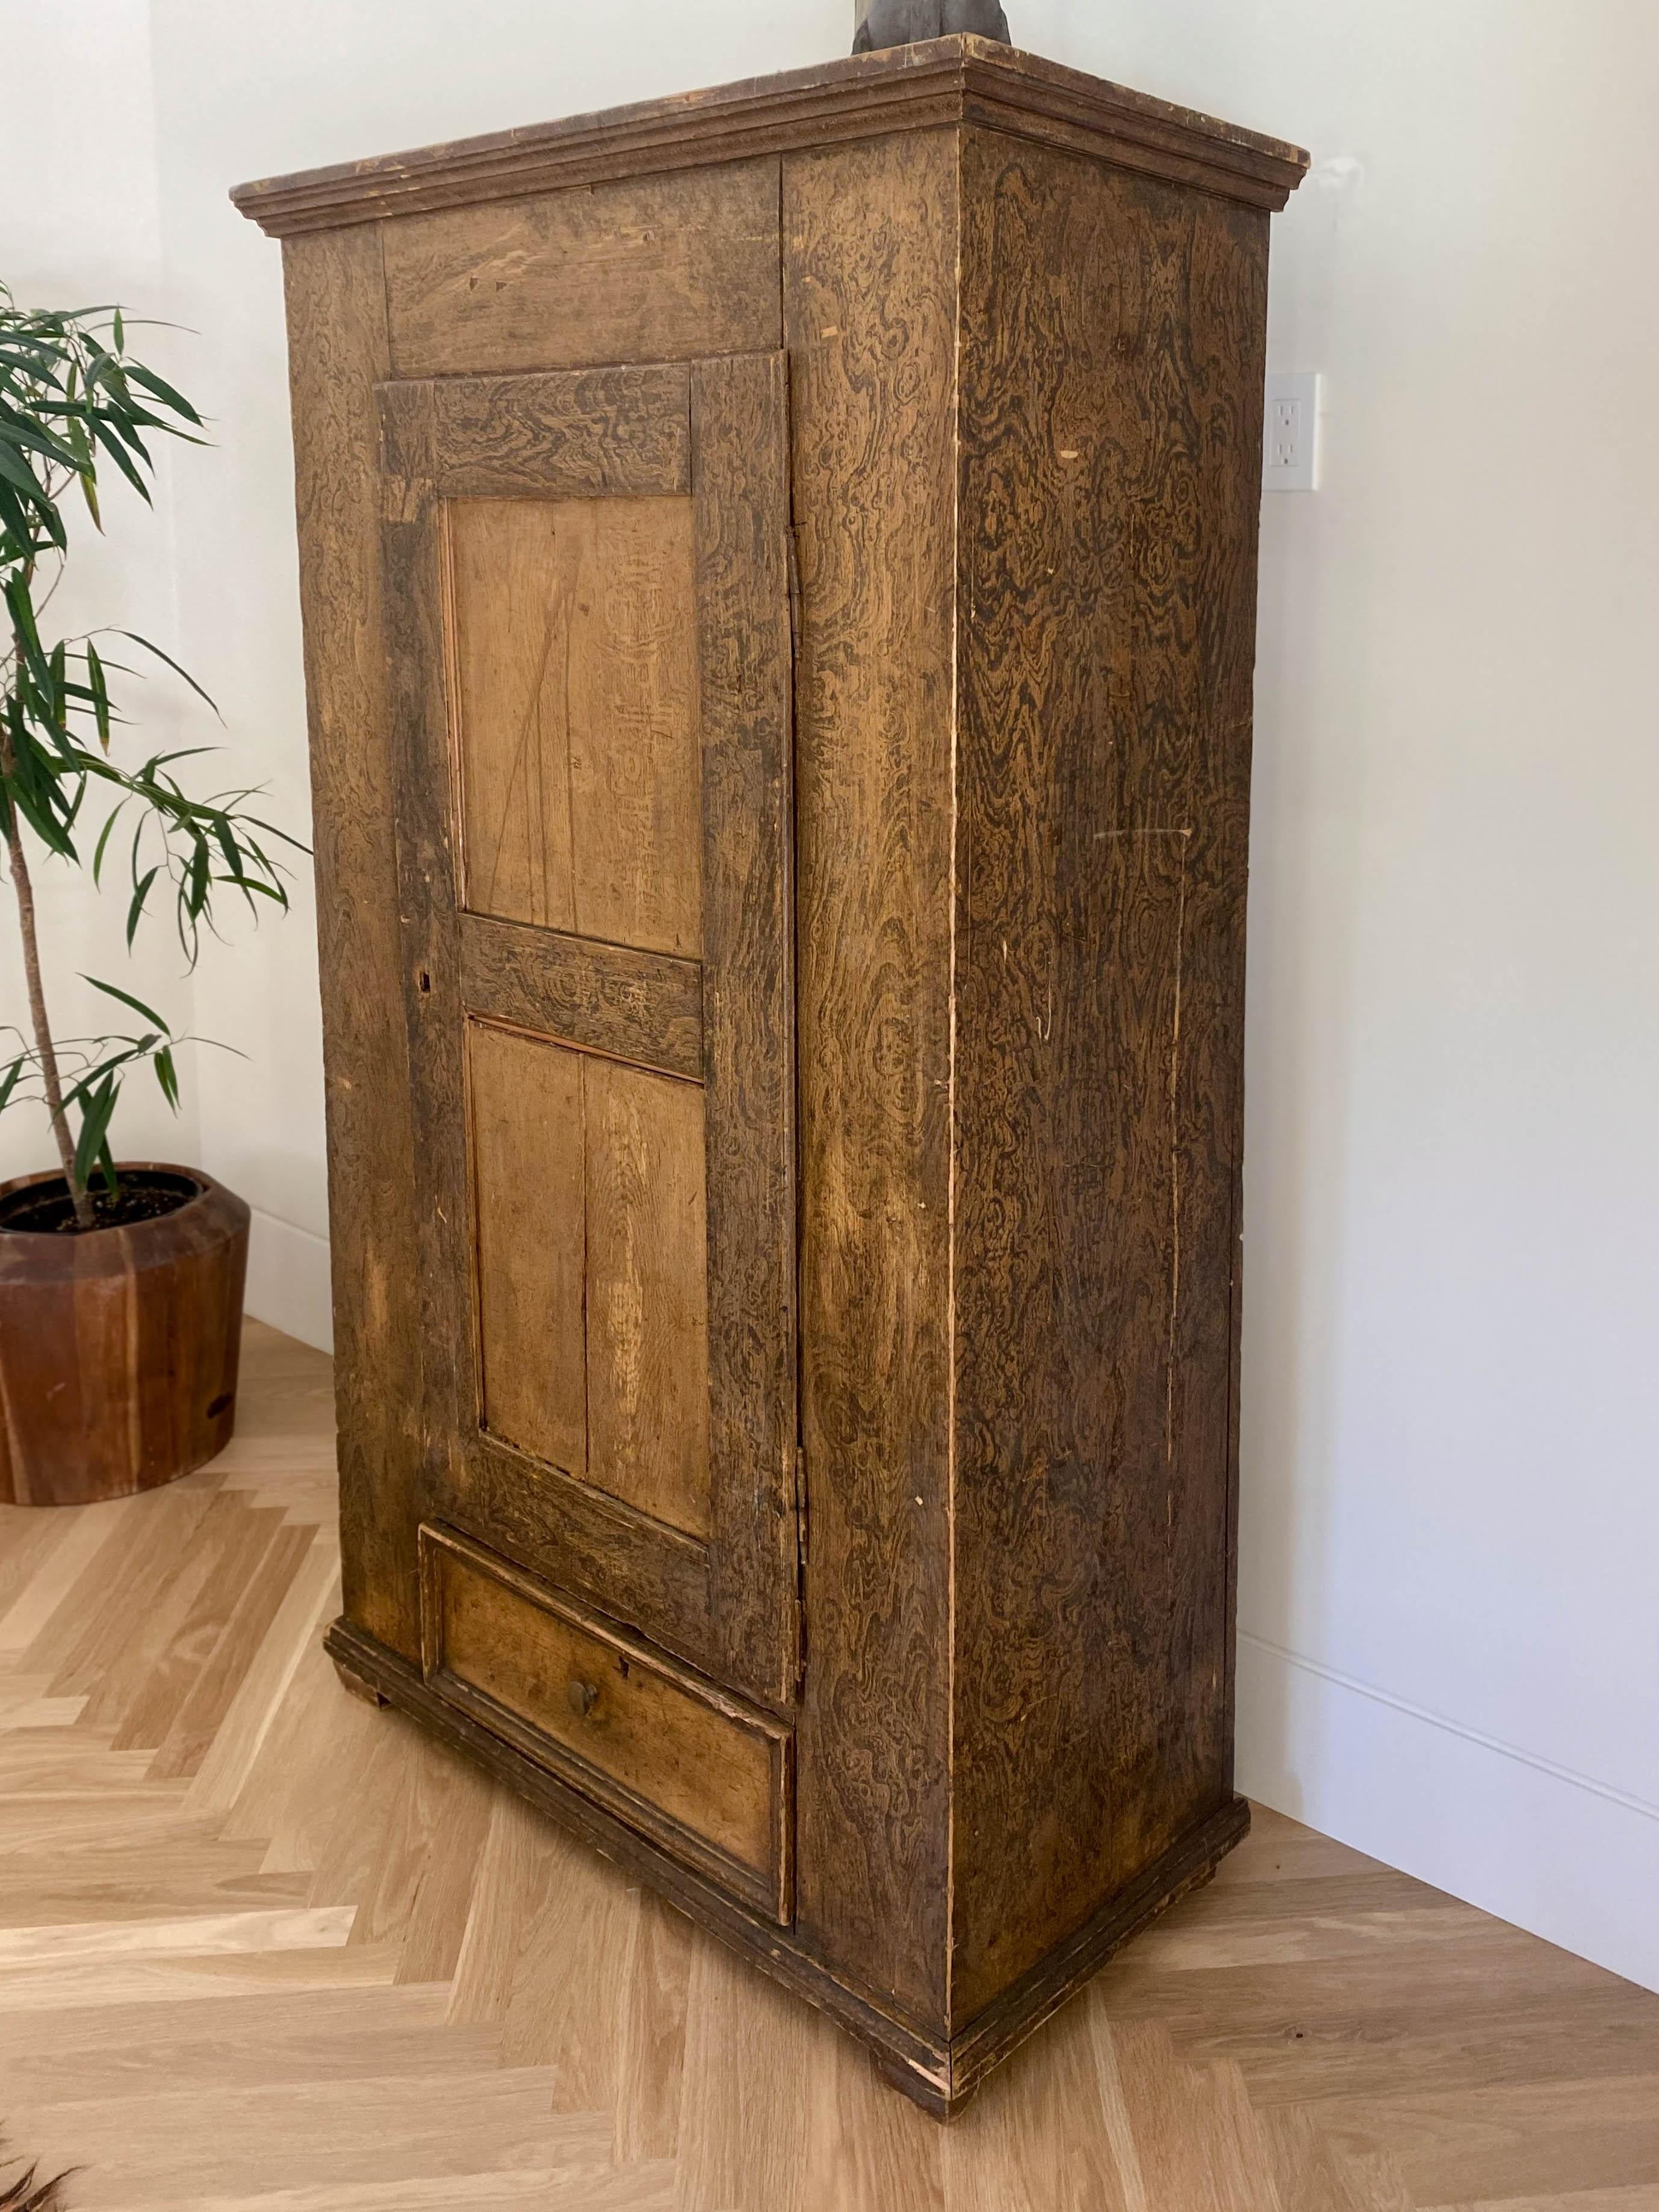 Imposing 19th Century Armoire Cabinet in Oak In Excellent Condition For Sale In West Hollywood, CA